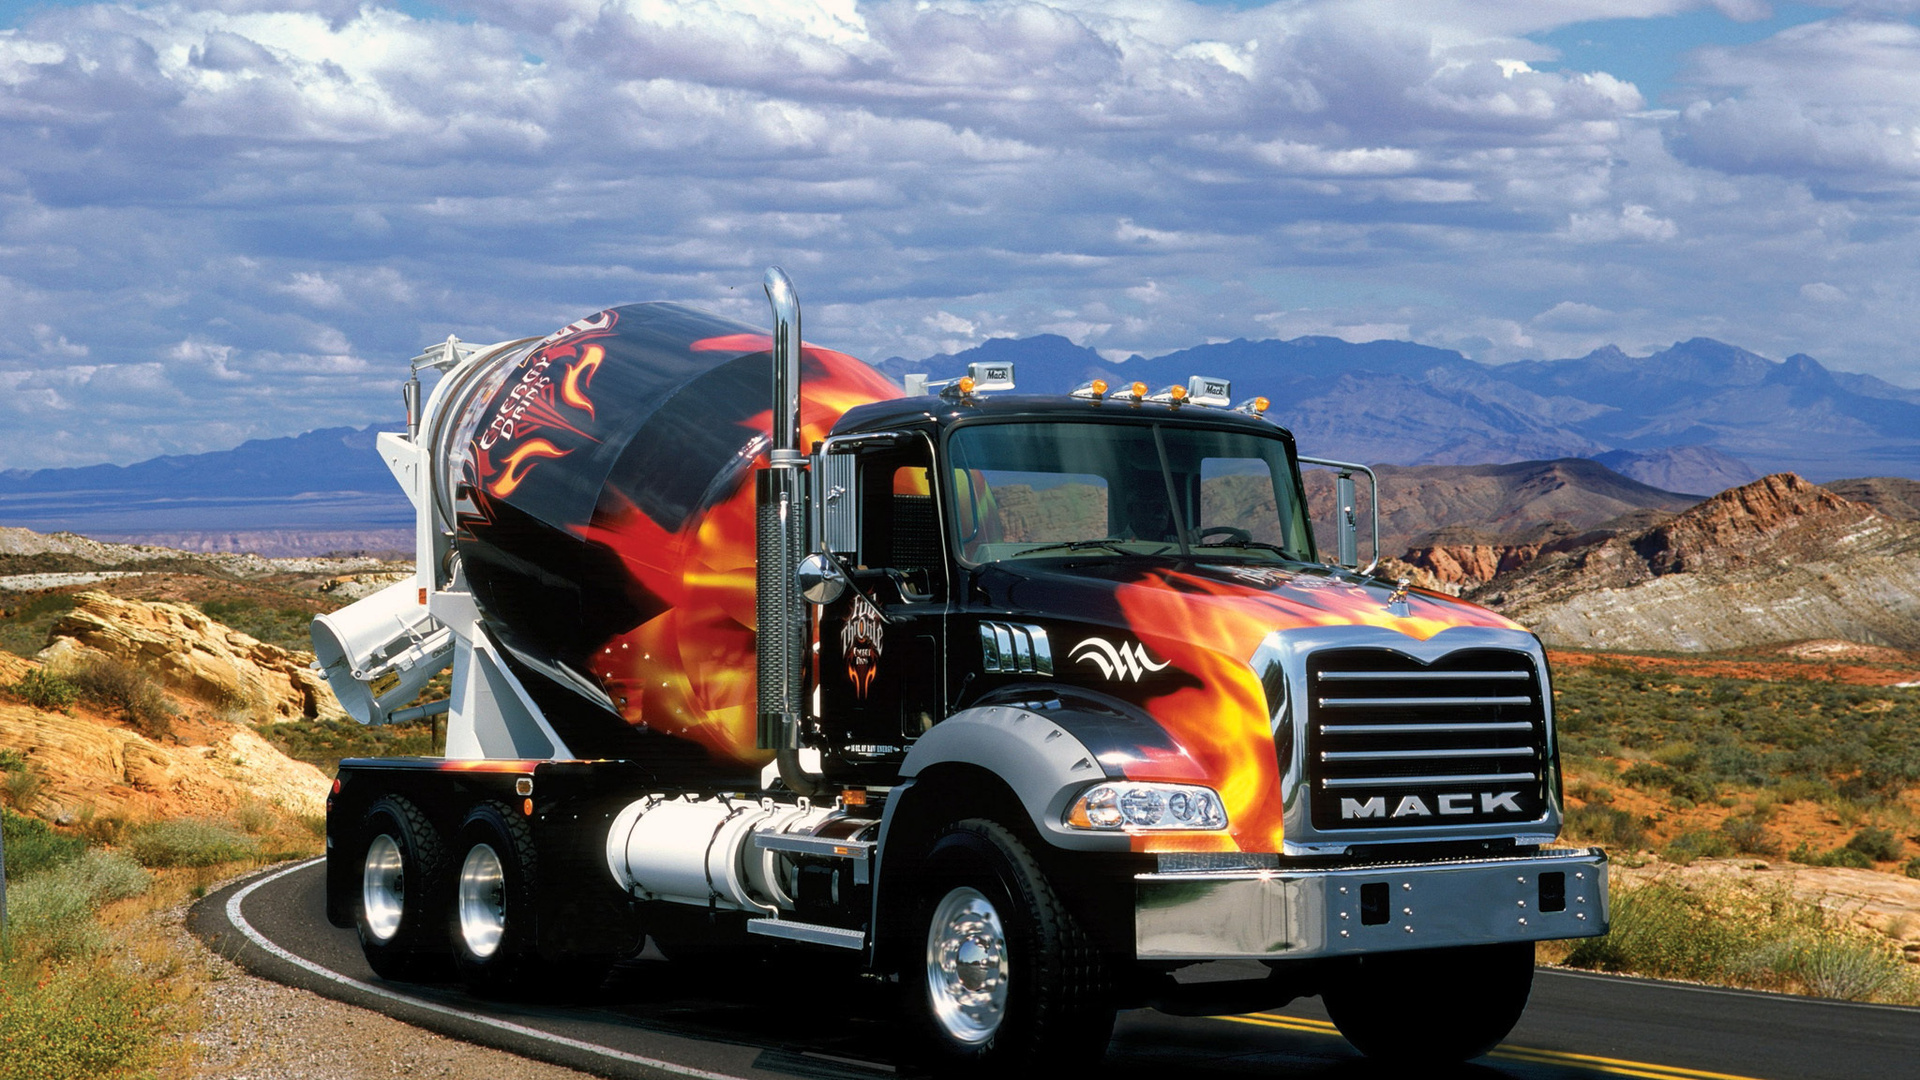 Multiple Mack trucks drive in a vibrant landscape, creating a captivating scene of powerful vehicles in motion.